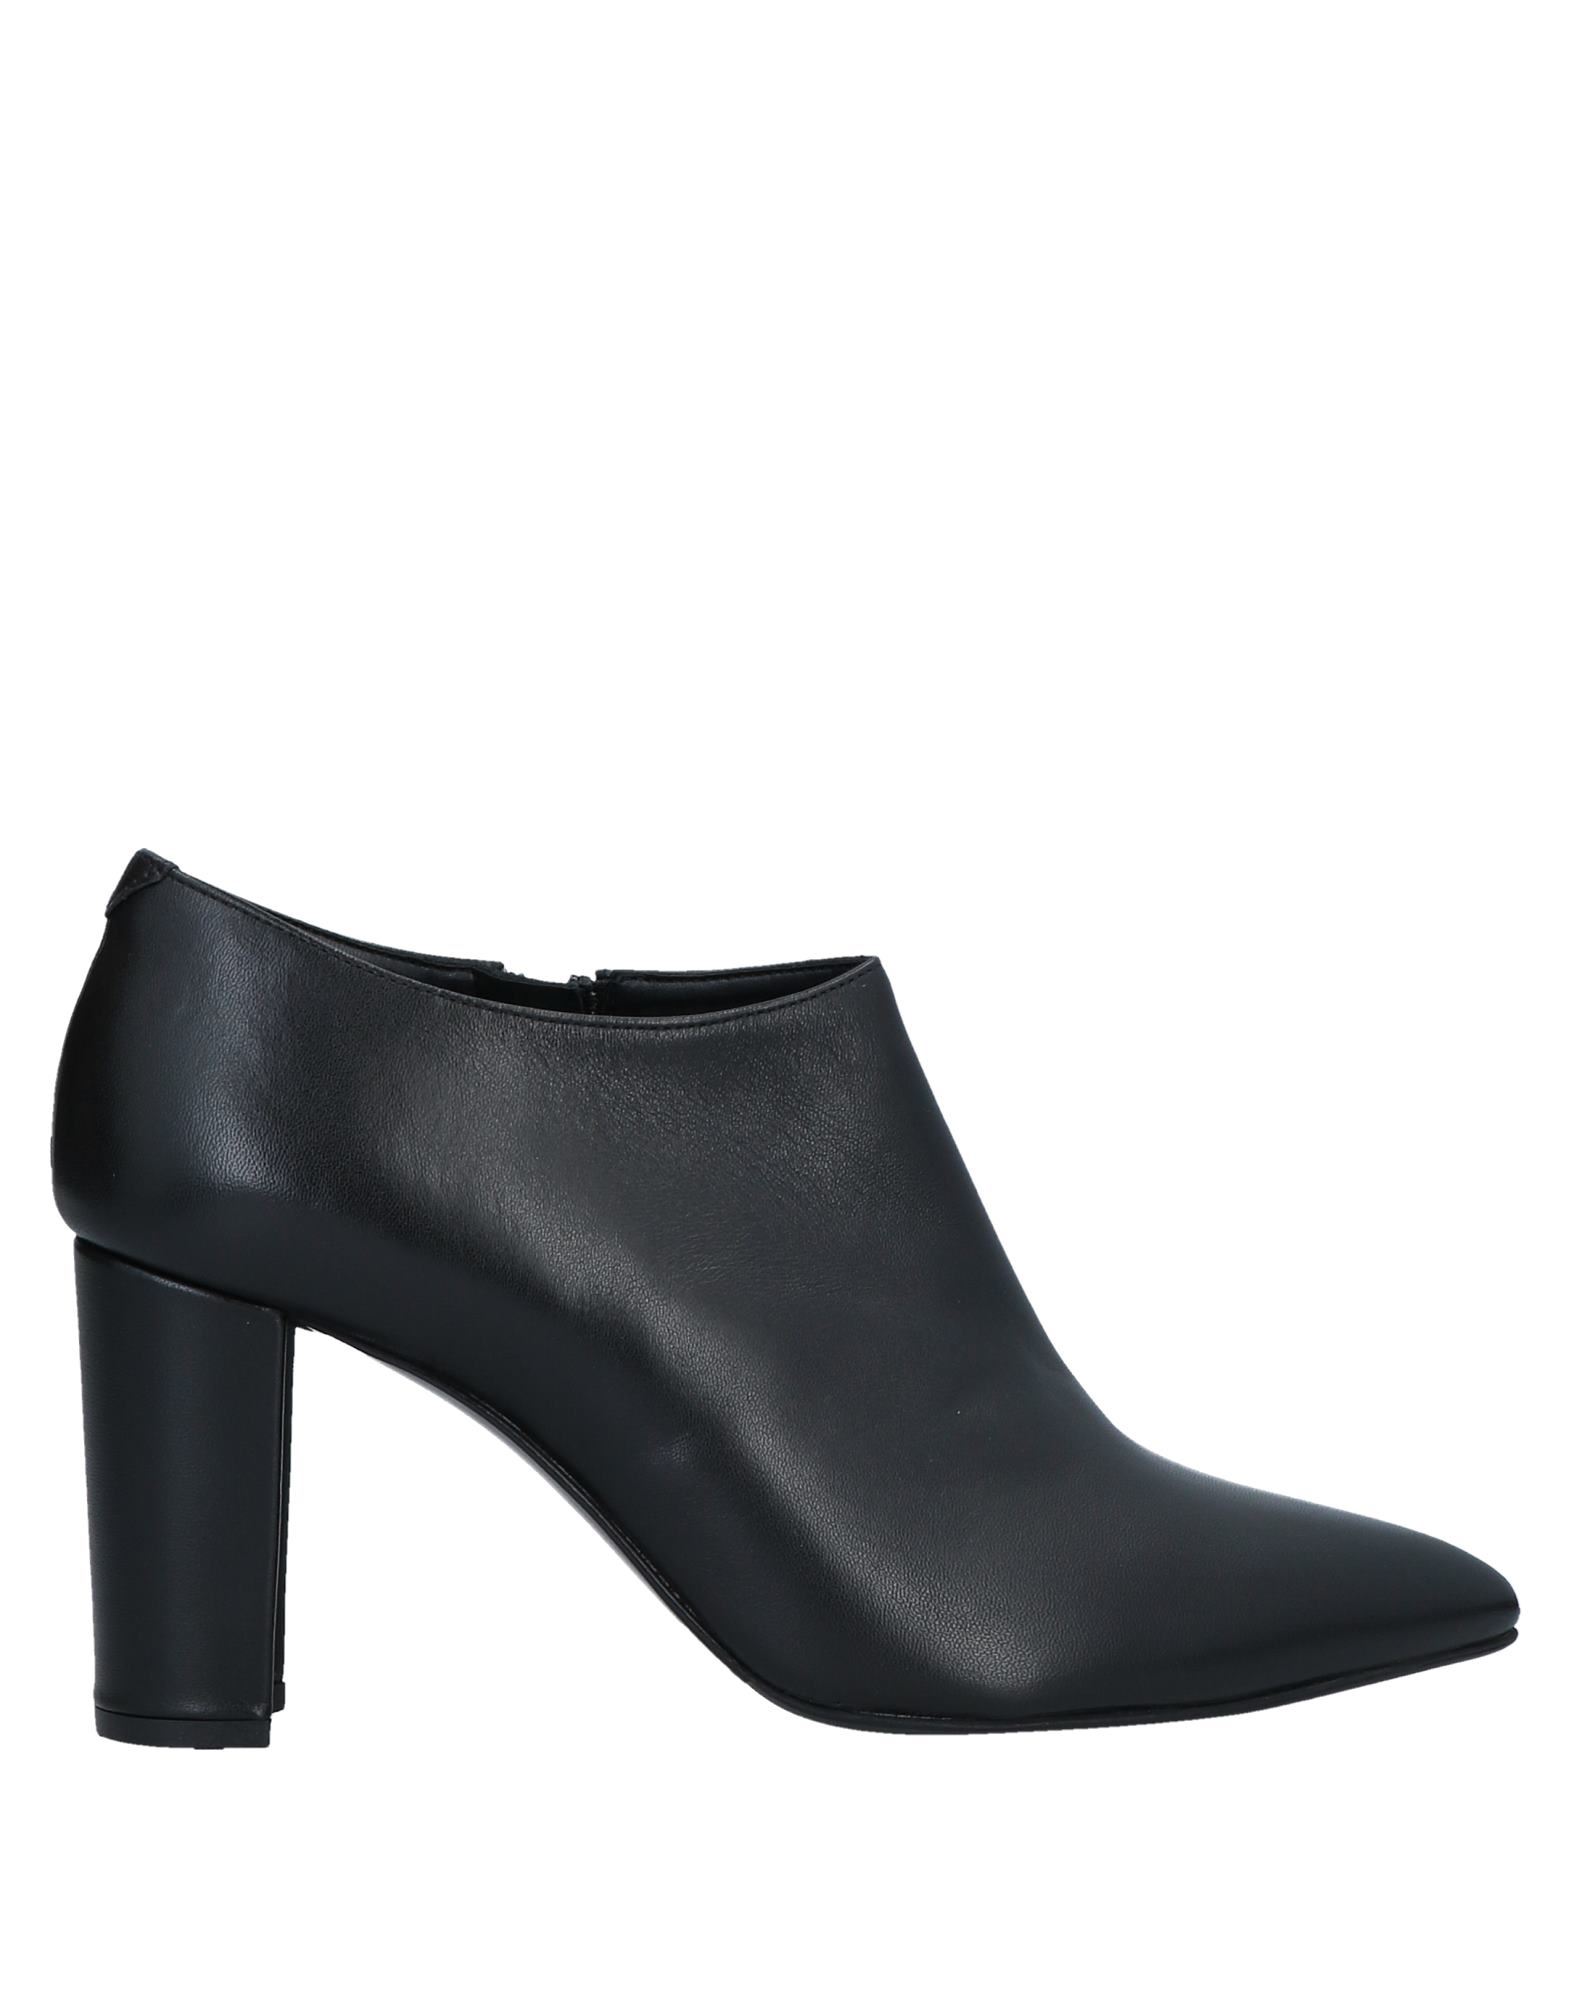 L'AMOUR by ALBANO Ankle boots